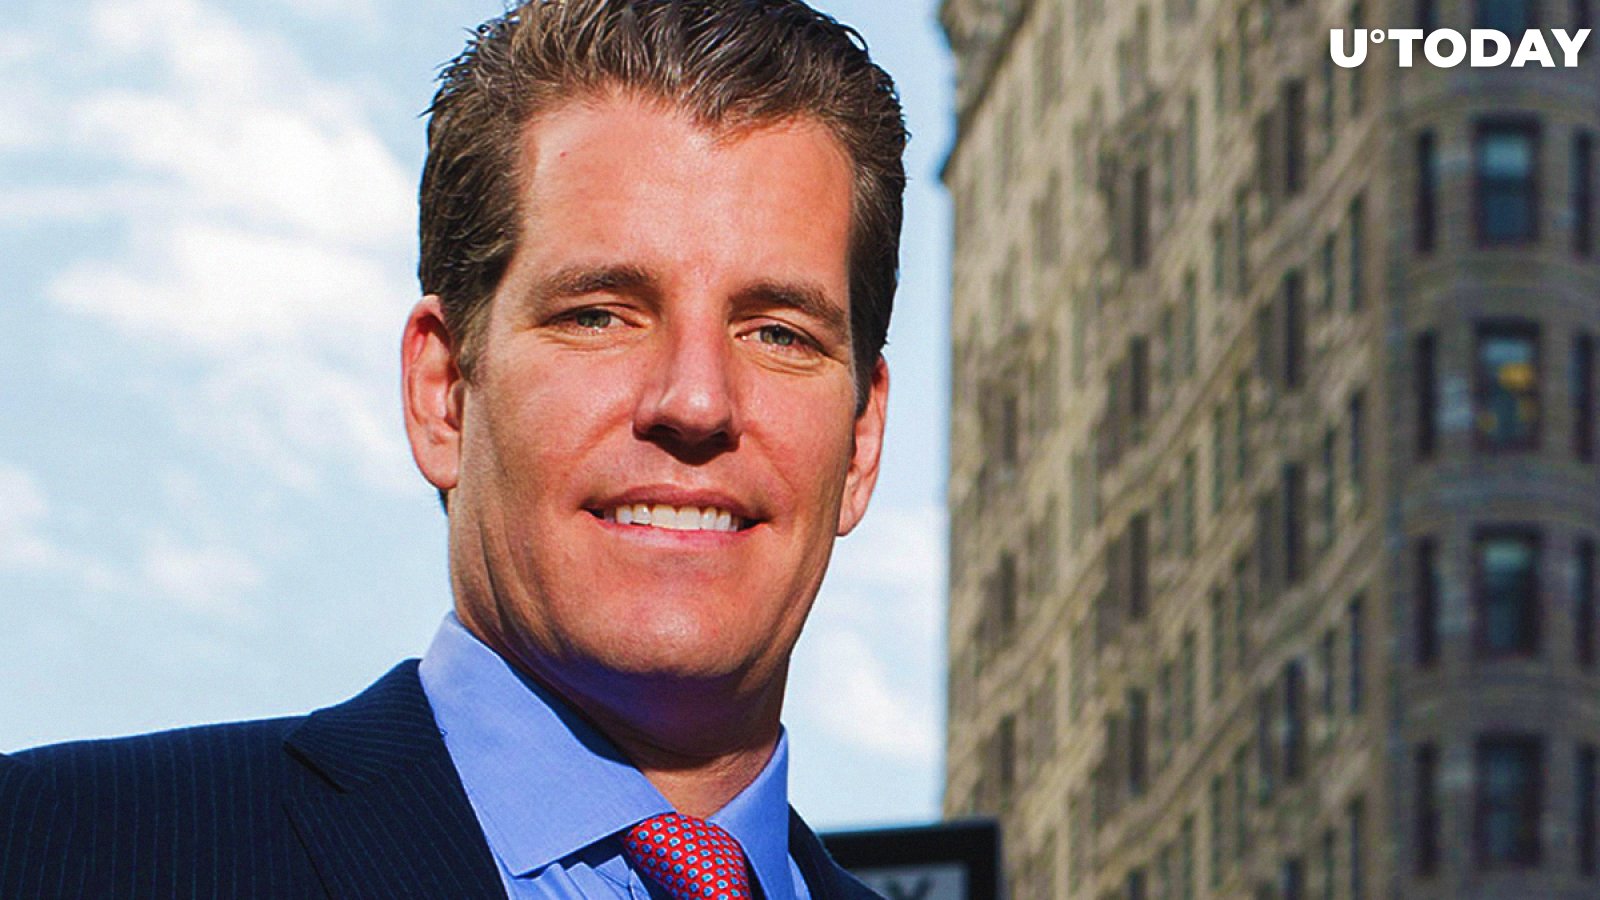  ‘It Will Pay to Be Early Bitcoin (BTC) Adopter’: Cameron Winklevoss